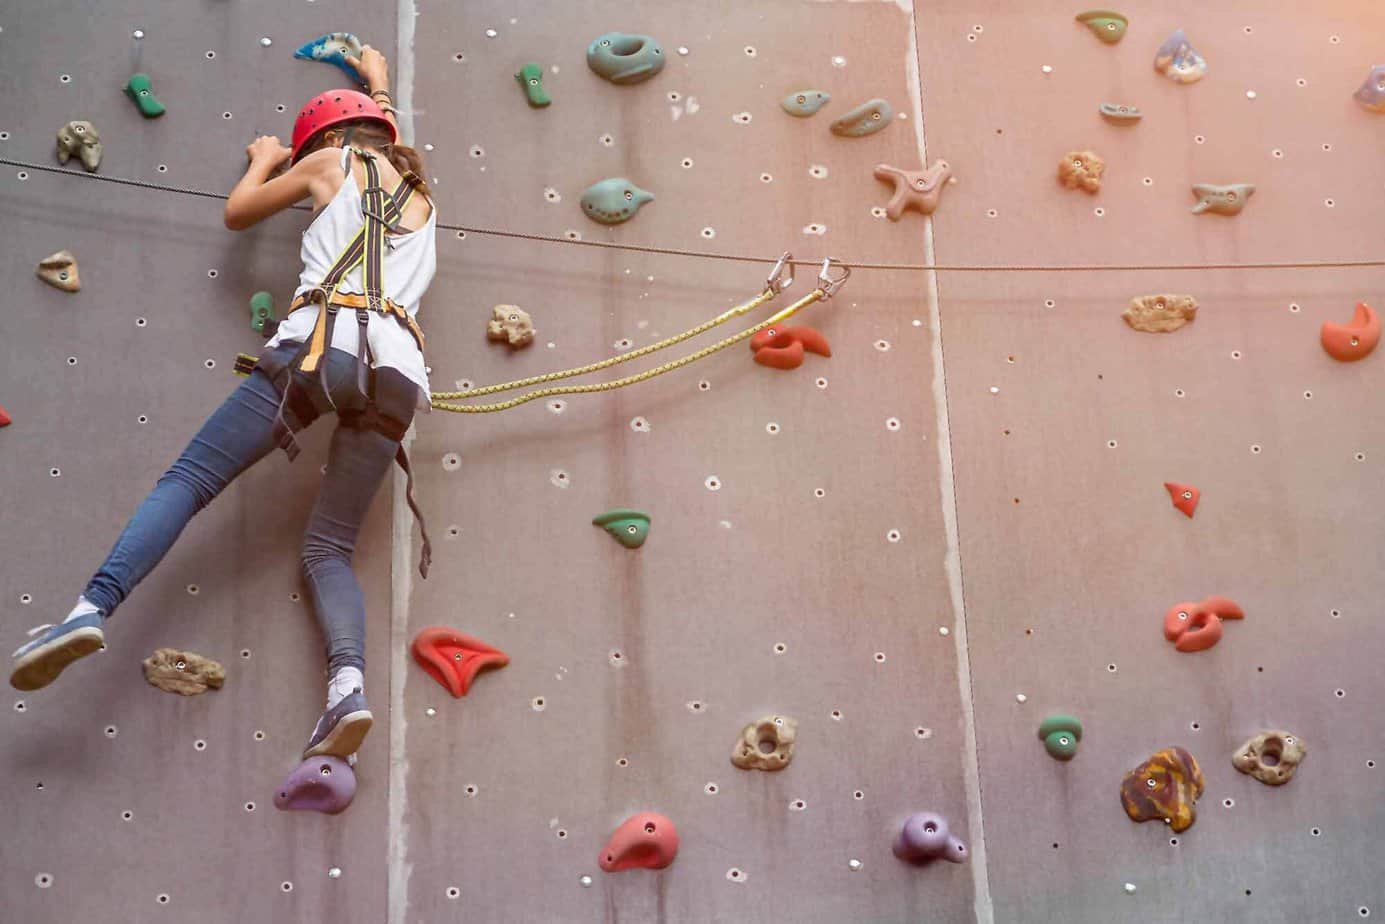 Woman rock climbing as part of adventure-based counseling at Mountainside in Canaan Connecticut